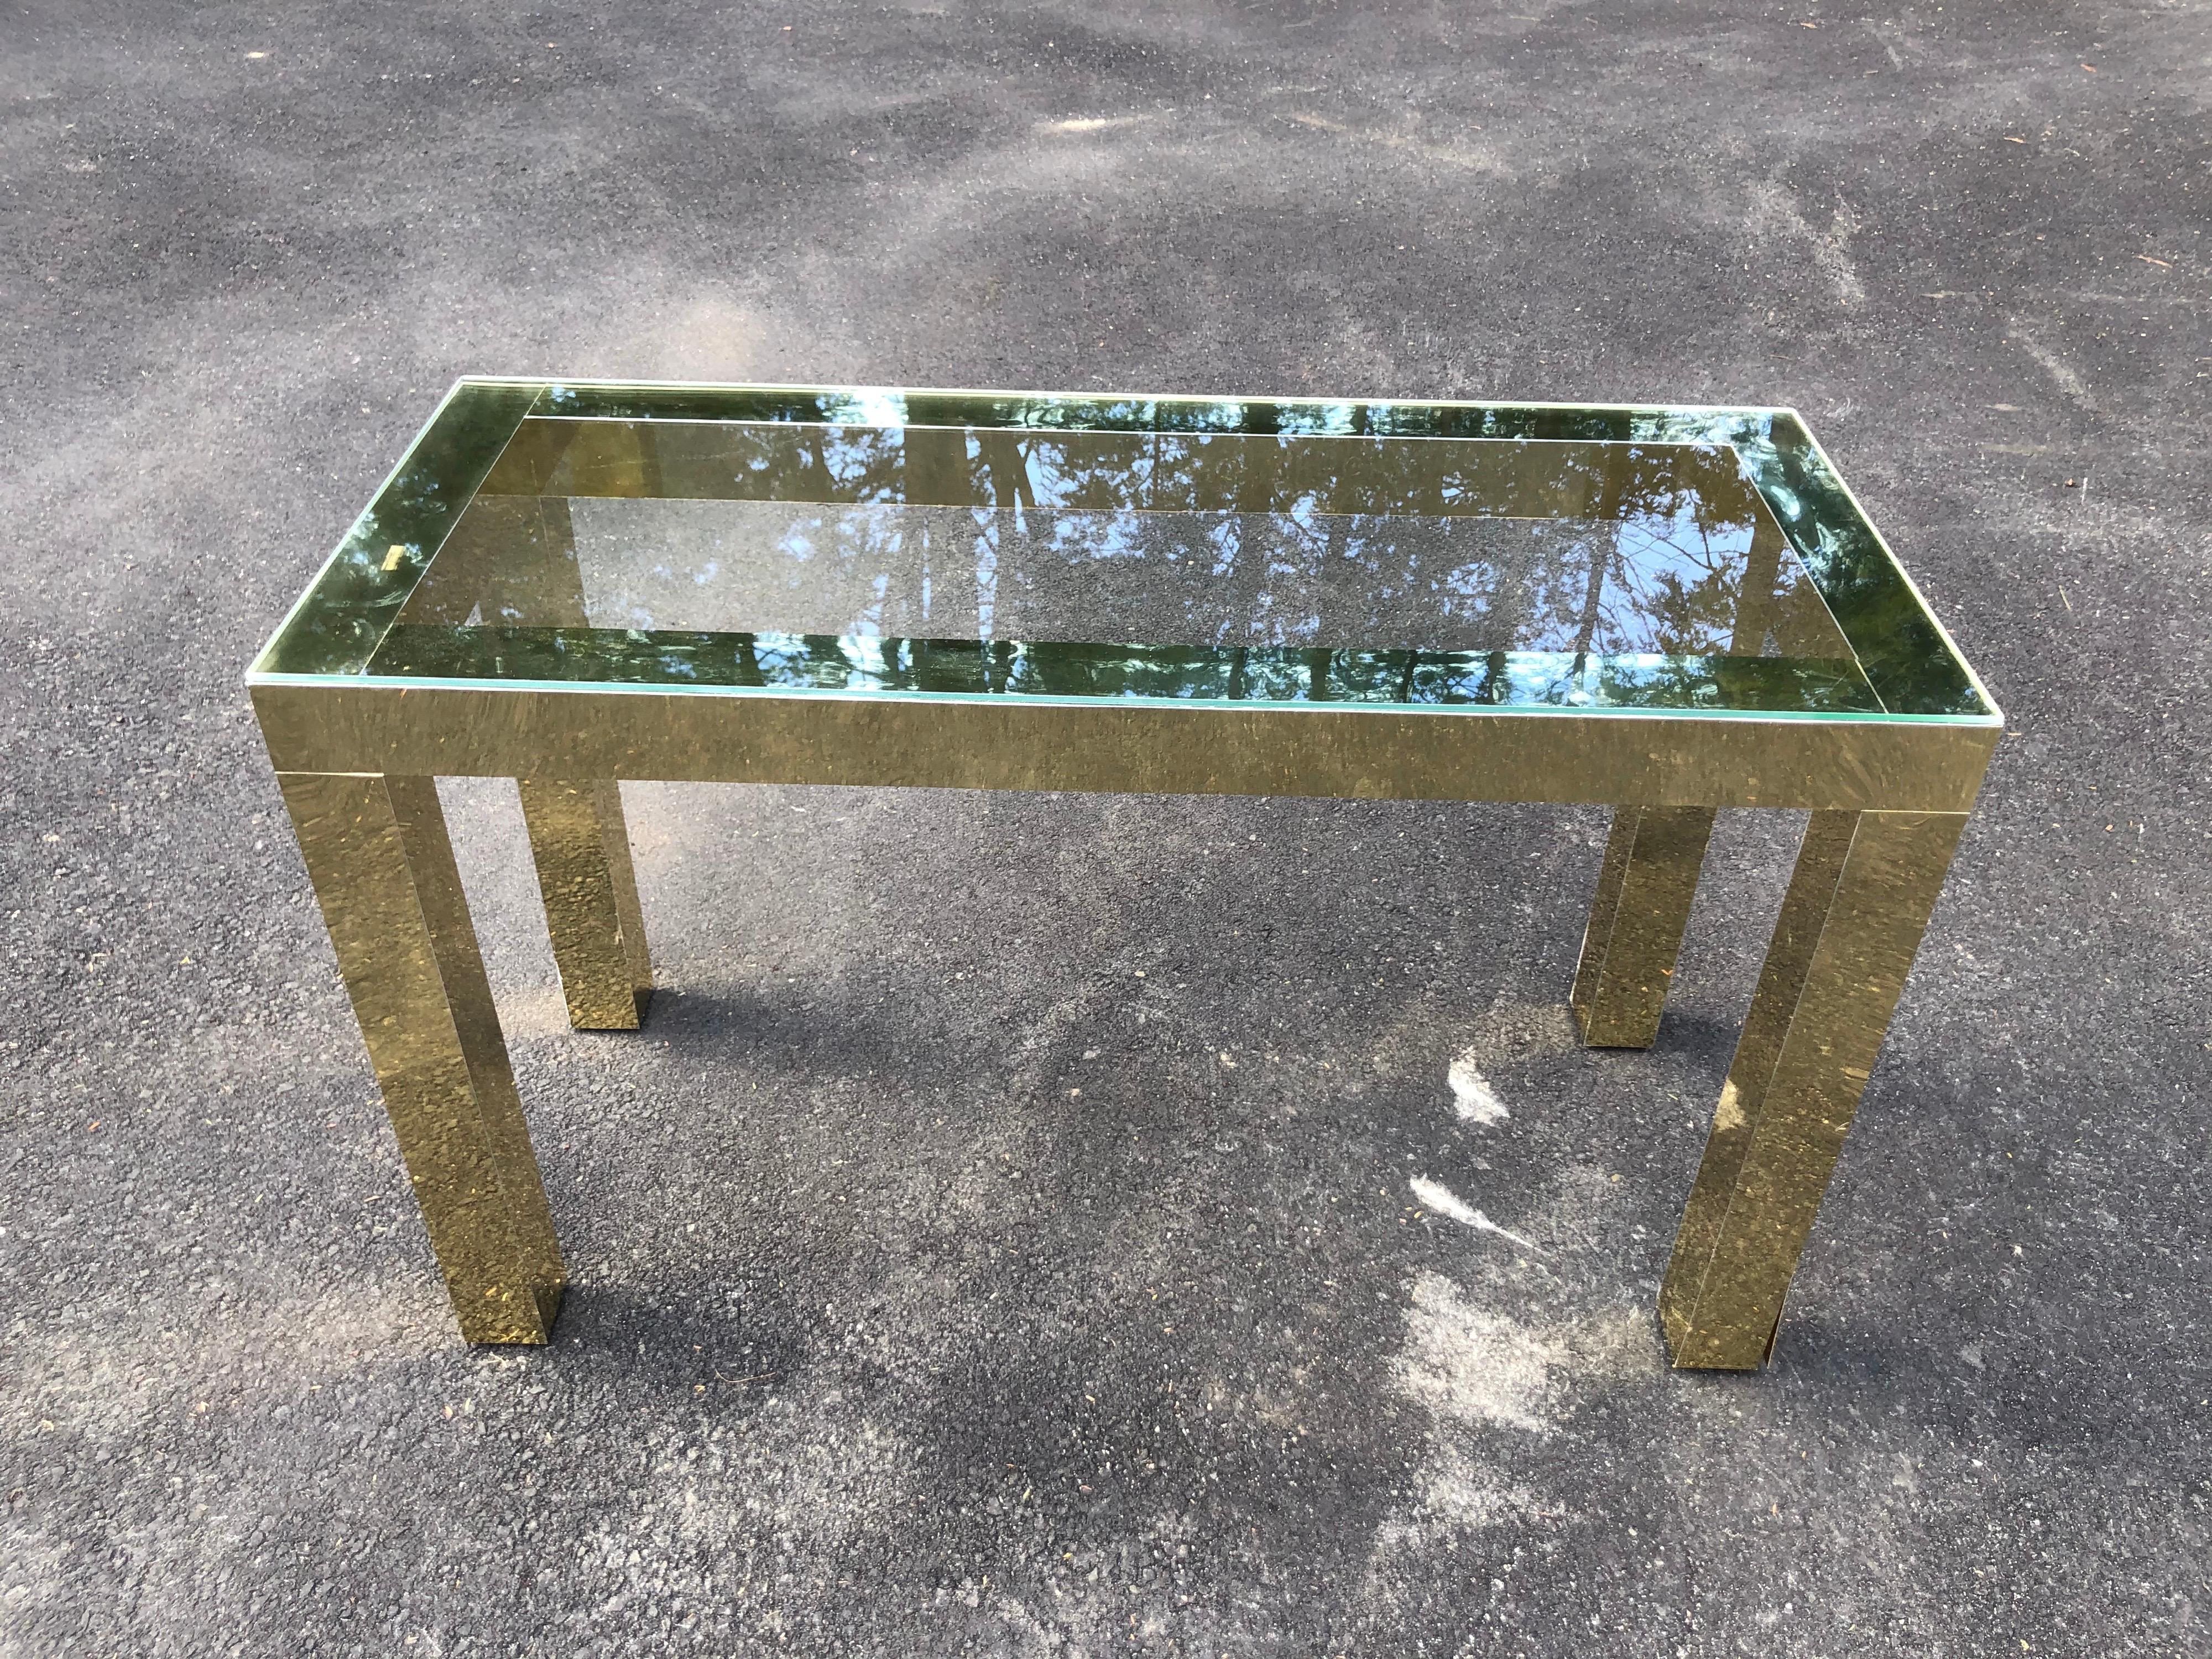 Mid-Century Modern brass and glass console. Laminated brass parsons design with clear glass top. Clean minimalist lines. Use as a console table, entry way or as a small vanity/desk.